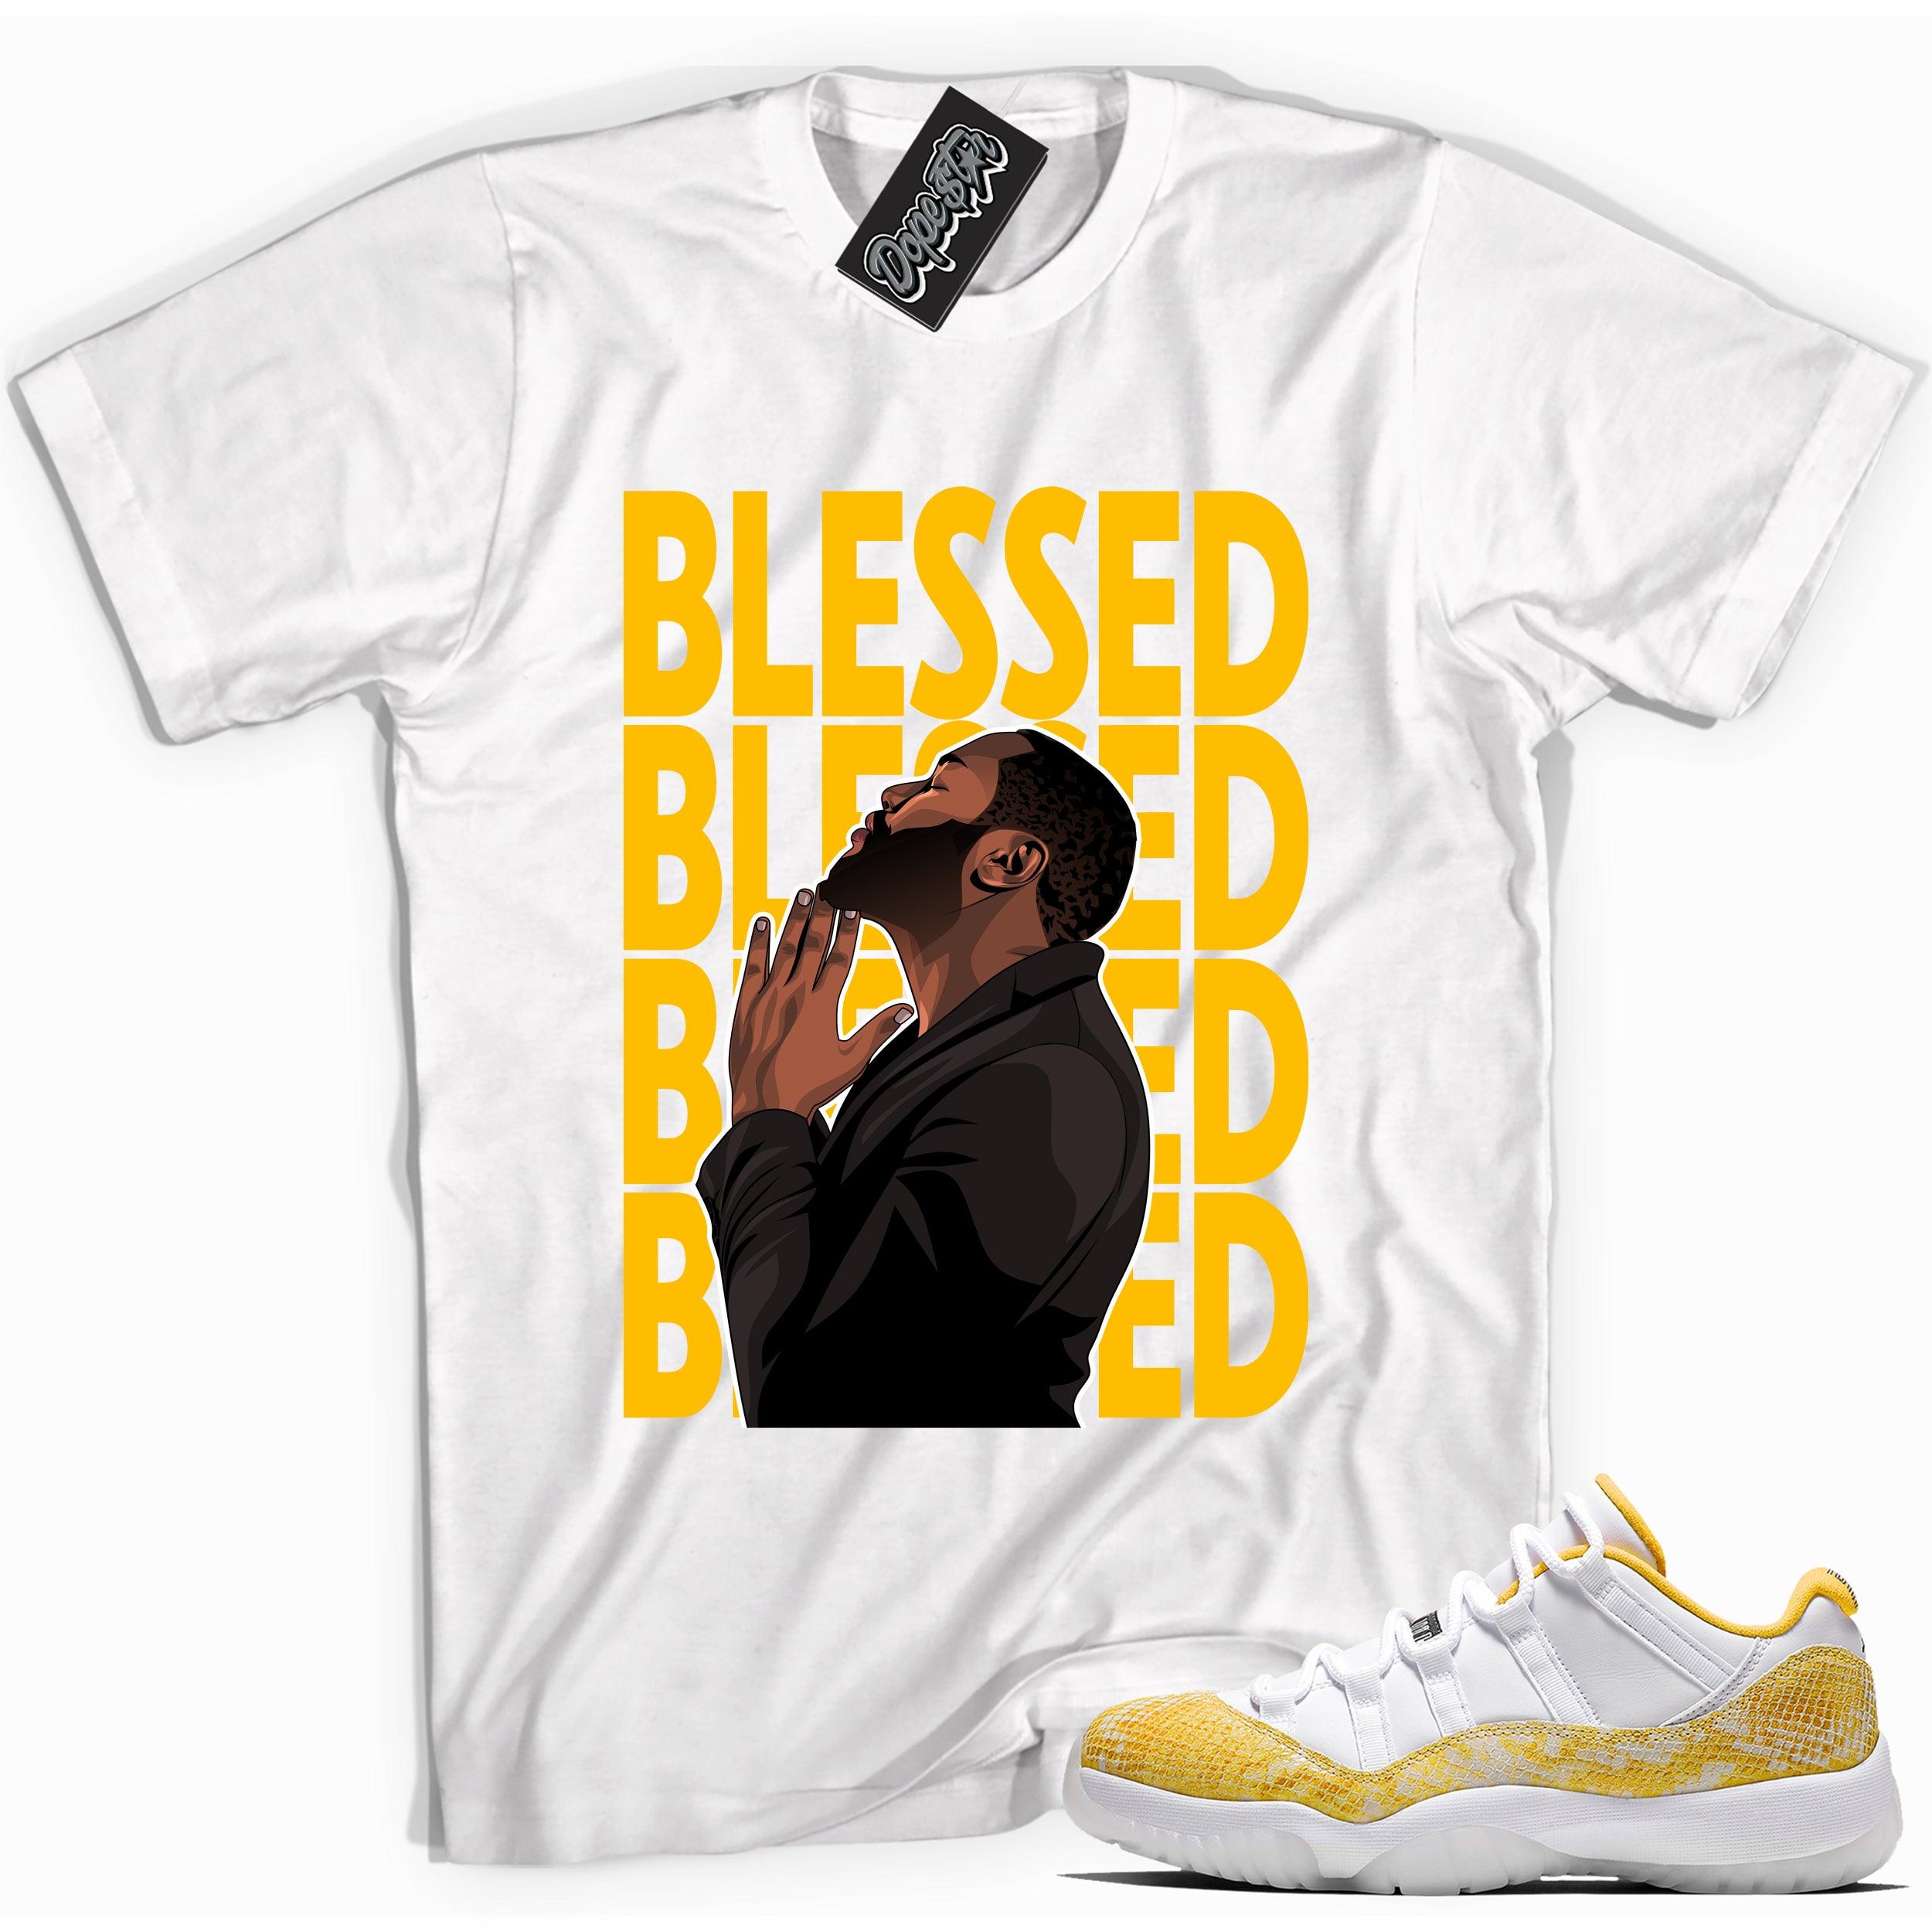 Cool white graphic tee with 'god blessed' print, that perfectly matches Air Jordan 11 Low Yellow Snakeskin sneakers